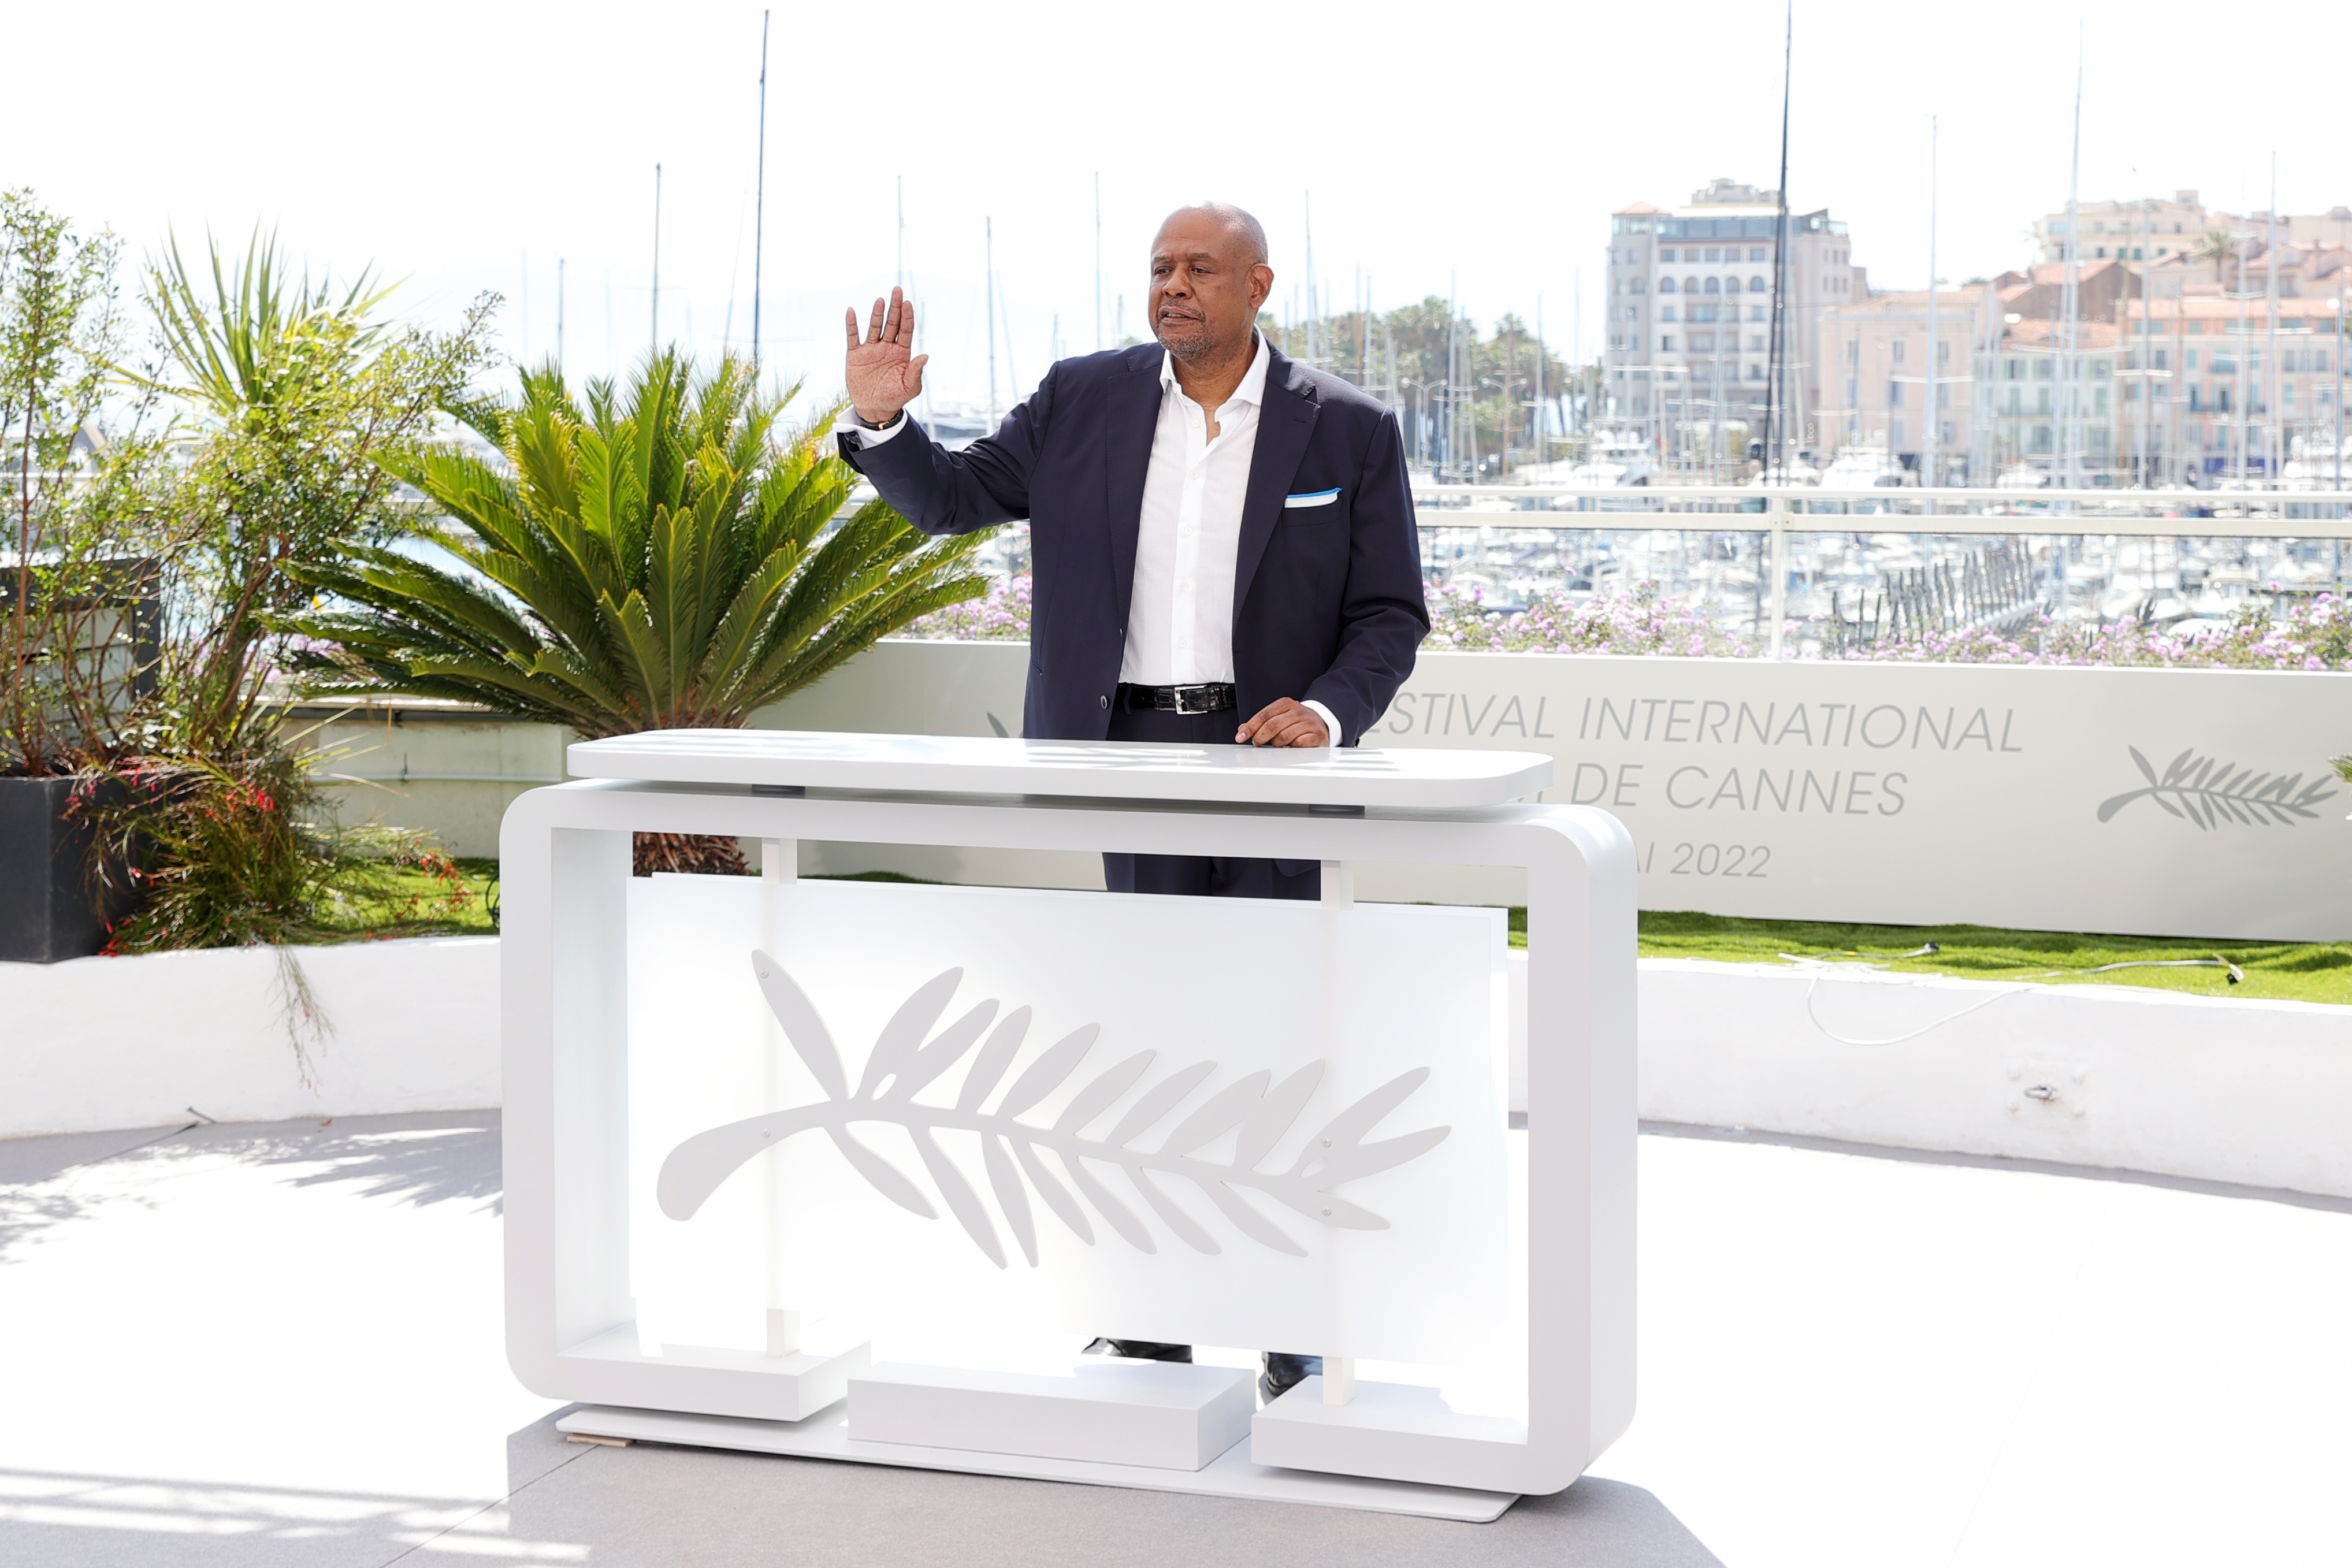 Forest Whitaker Receives The Honorary Palme d'Or  - Photocall - The 75th Annual Cannes Film Festival